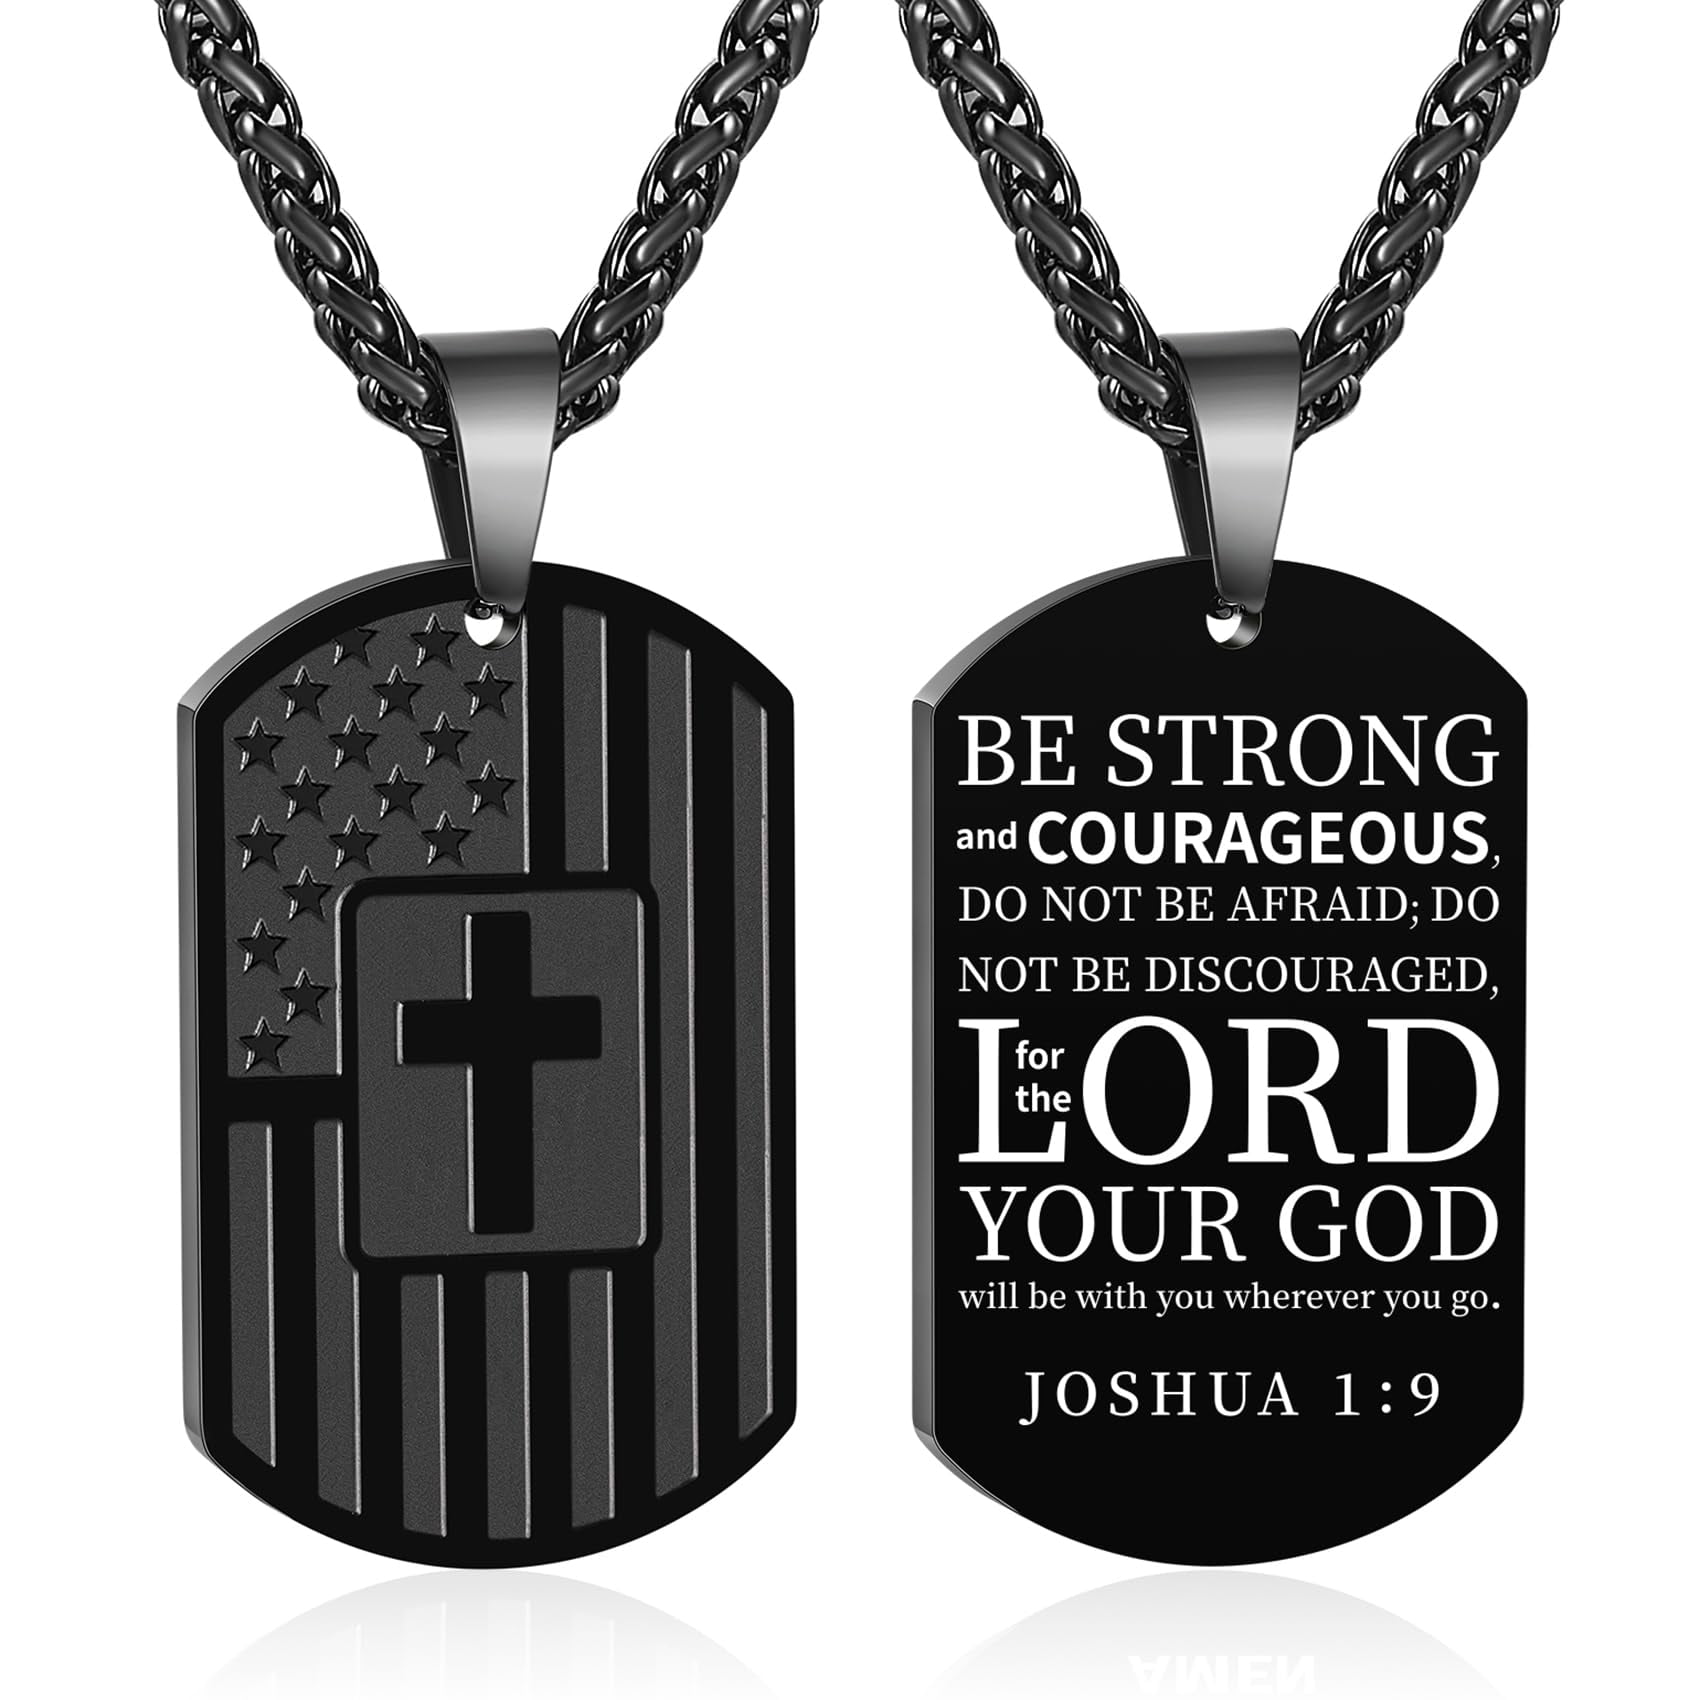  XIEXIELA Black Men's Dog Tag Necklace, Stainless Steel Dog Tag  Necklace for Men Boys Women